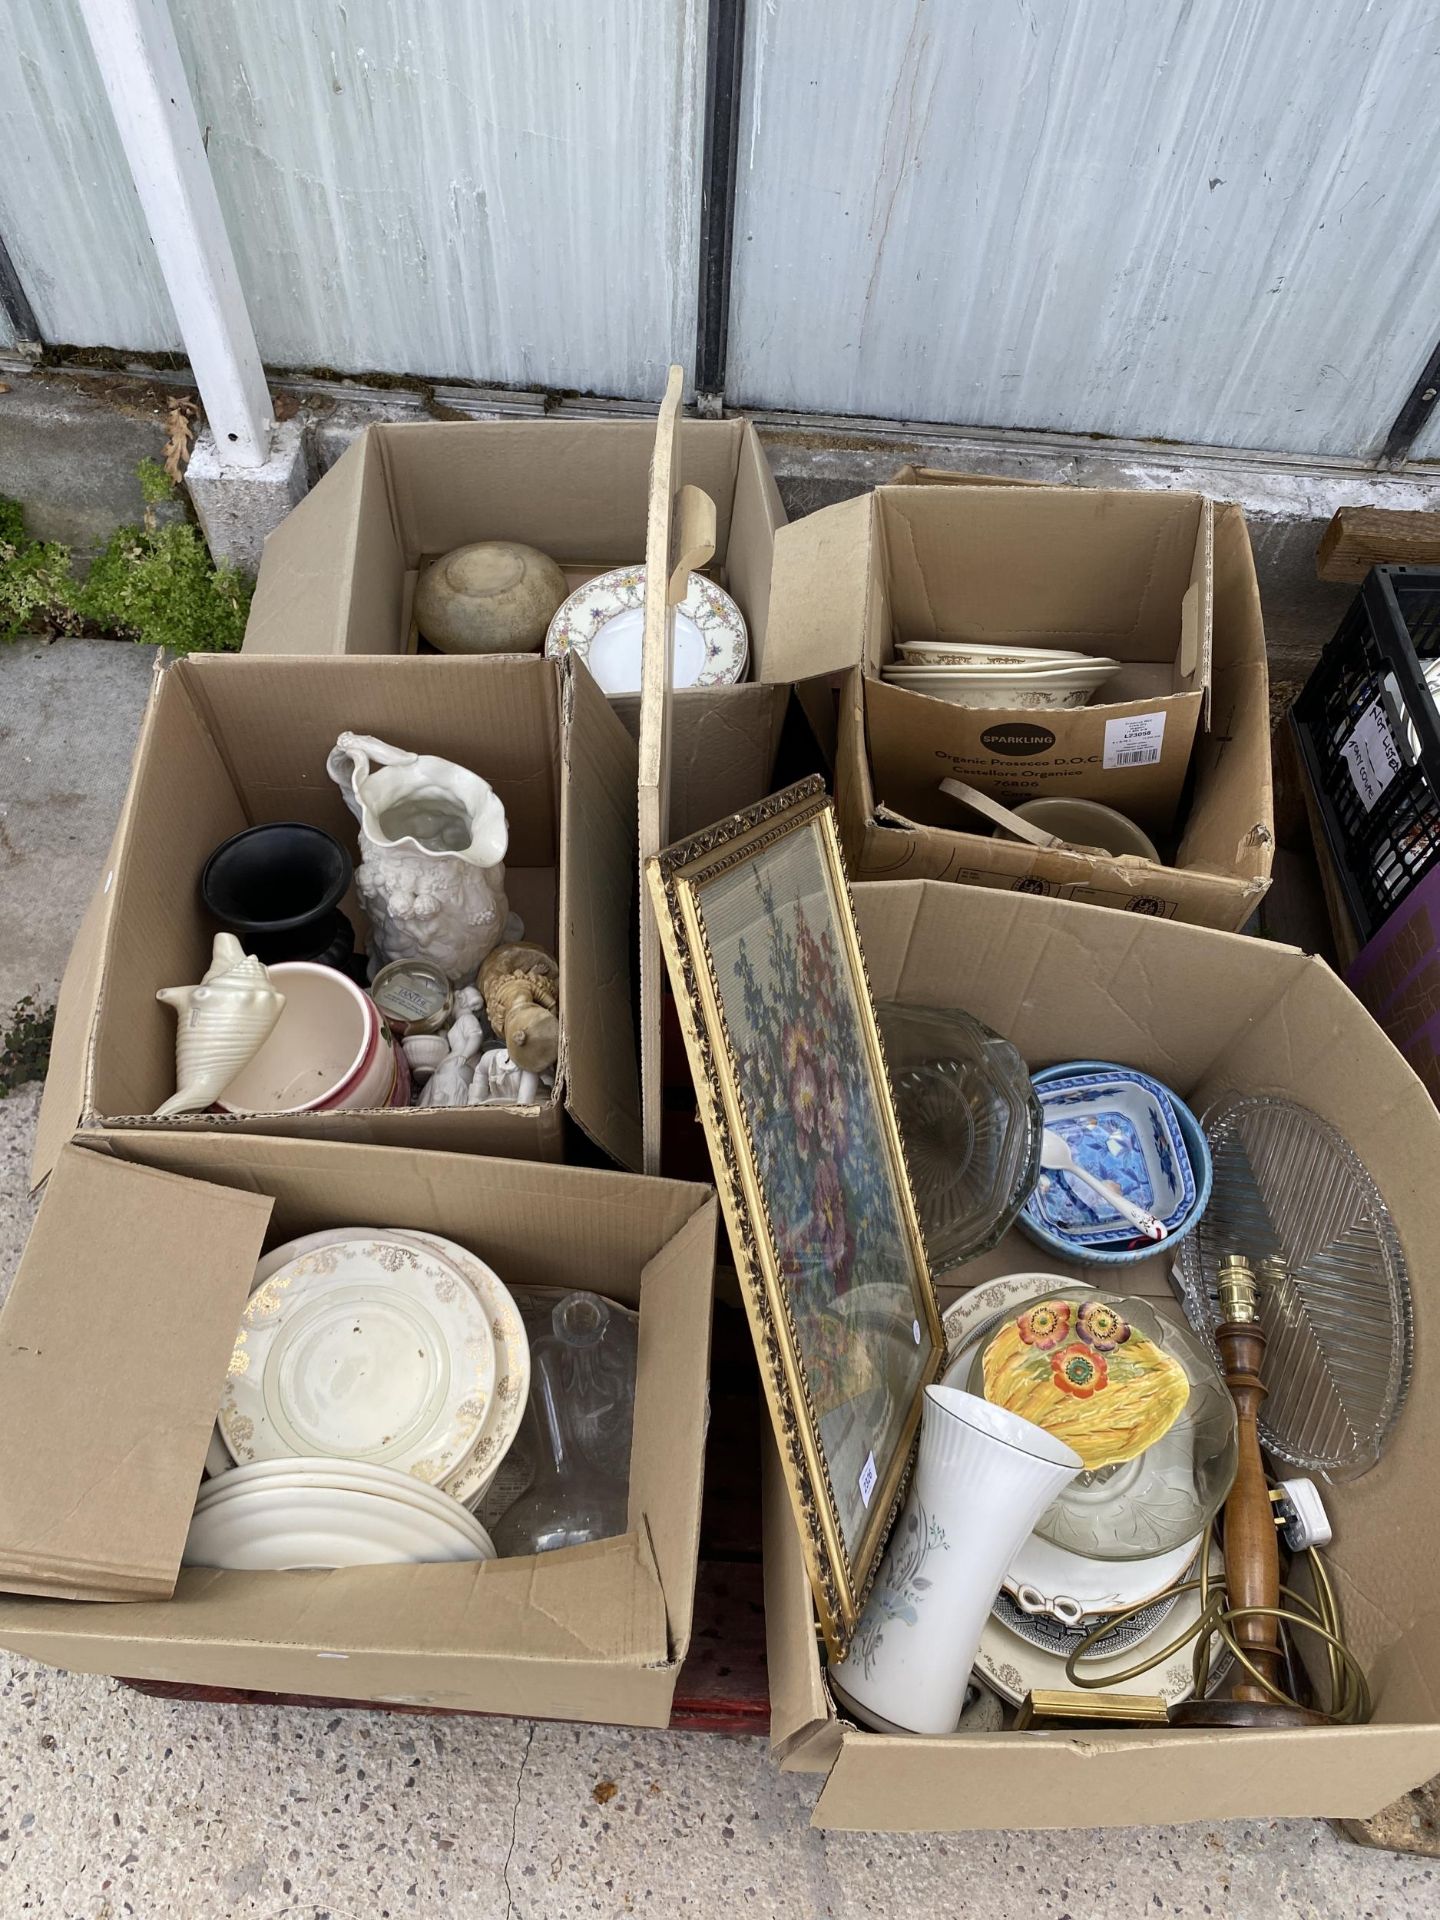 AN ASSORTMENT OF HOUSEHOLD CLEARANCE ITEMS TO INCLUDE CERAMICS AND GLASS WARE ETC